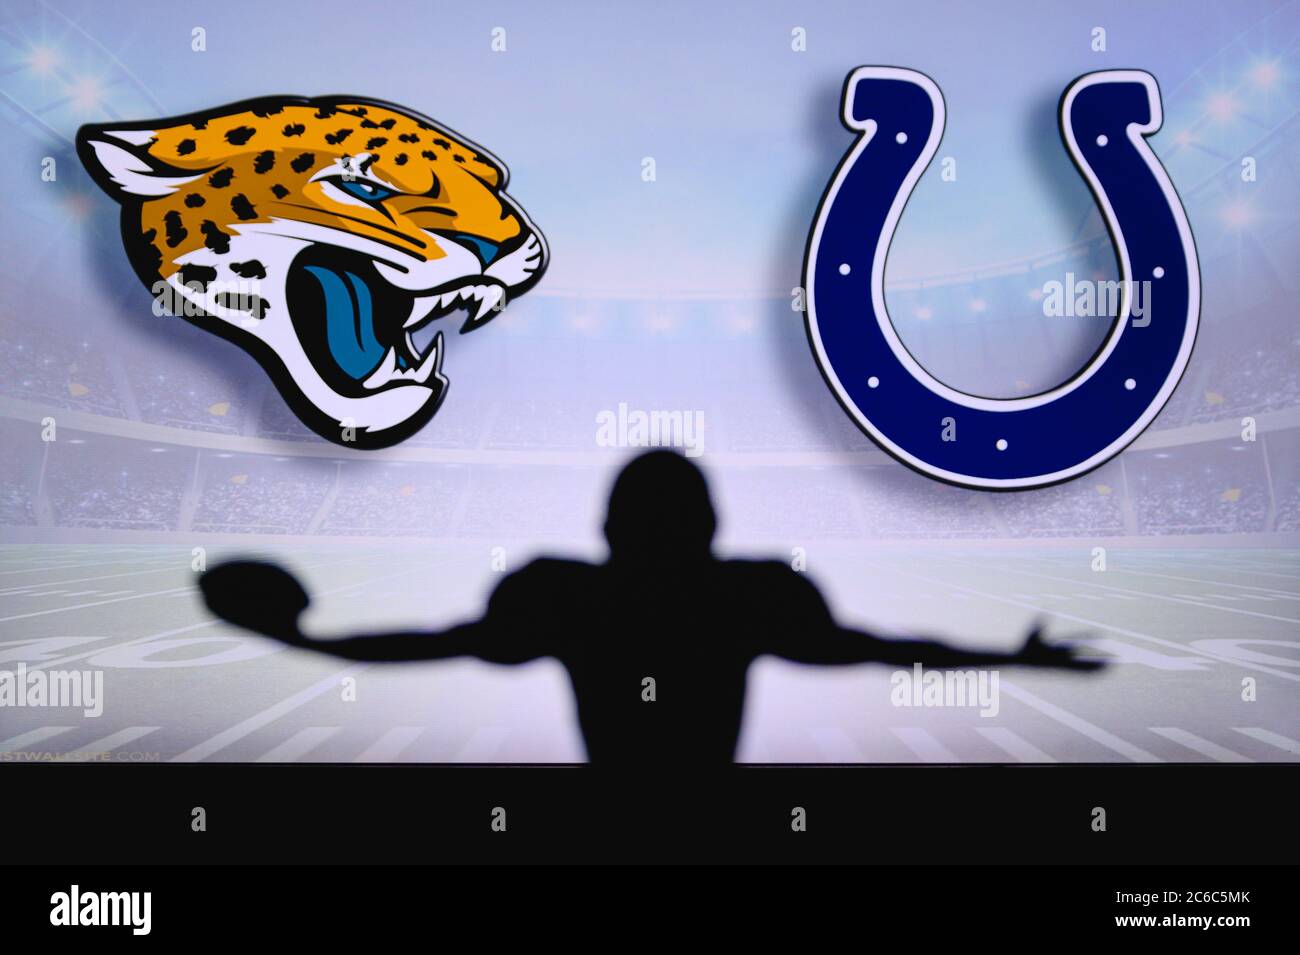 Jacksonville Jaguars vs. Indianapolis Colts. NFL Game. American Football League match. Silhouette of professional player celebrate touch down. Screen Stock Photo